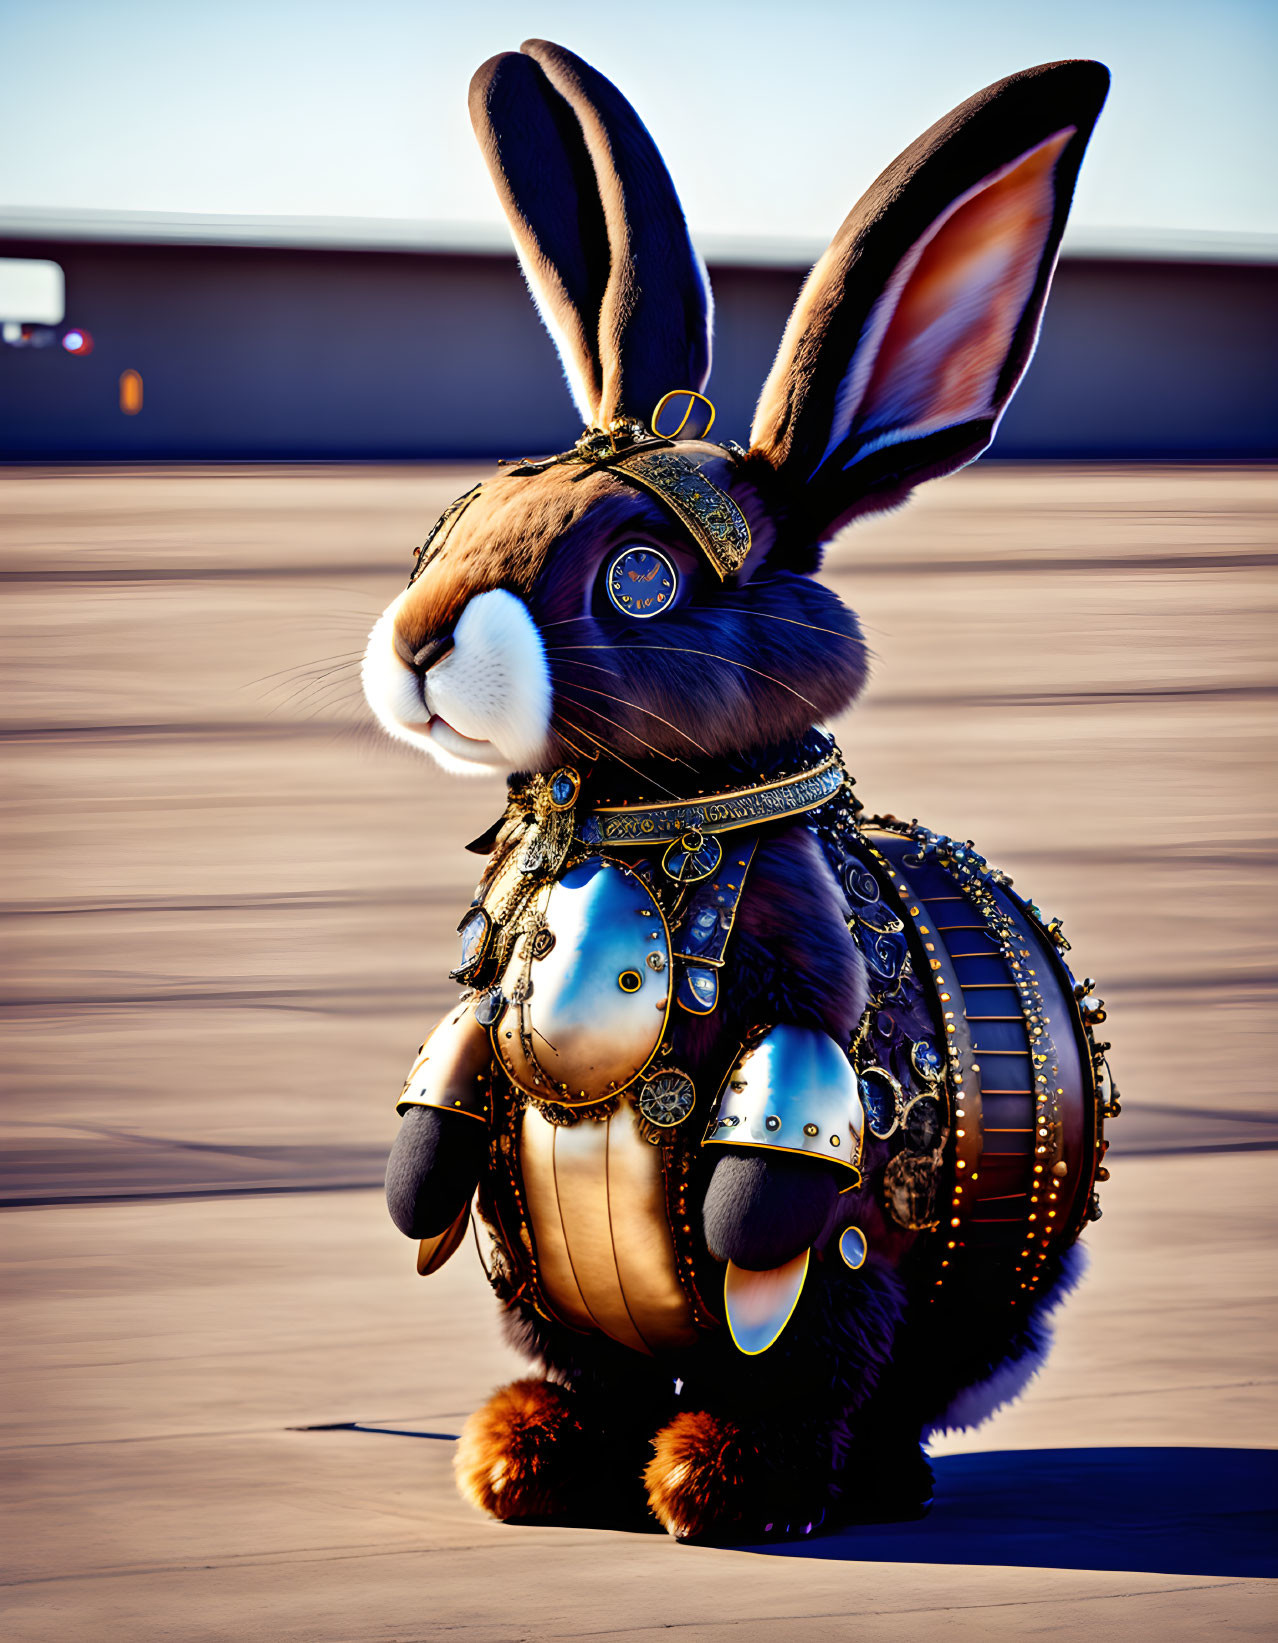 Steampunk-style 3D-rendered rabbit with brass accents on smooth surface